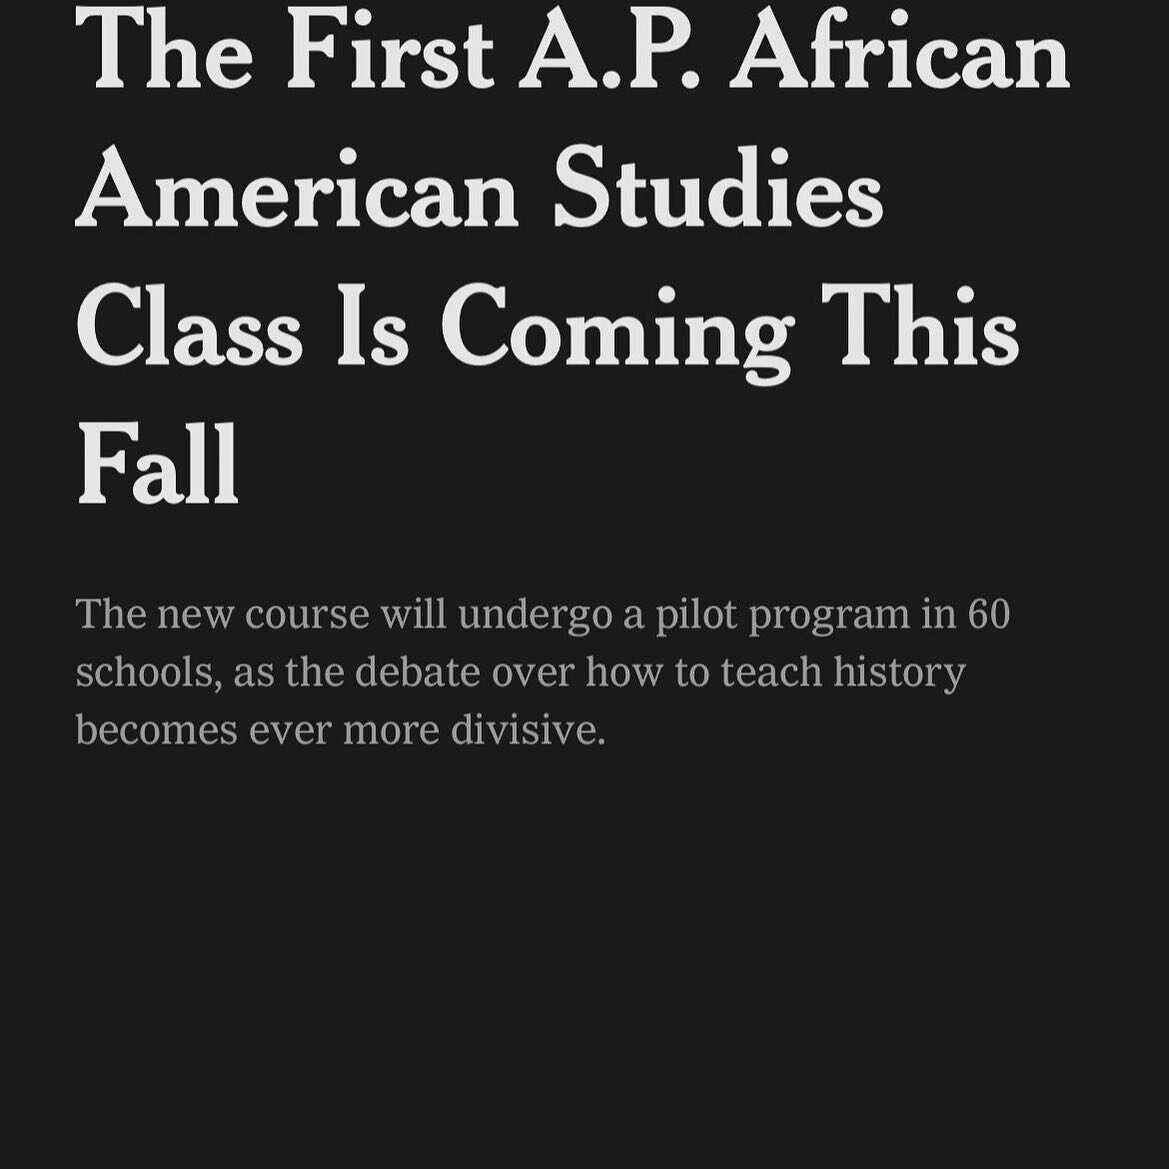 You know it is ridiculously beyond time when the AP finally gets around to it.